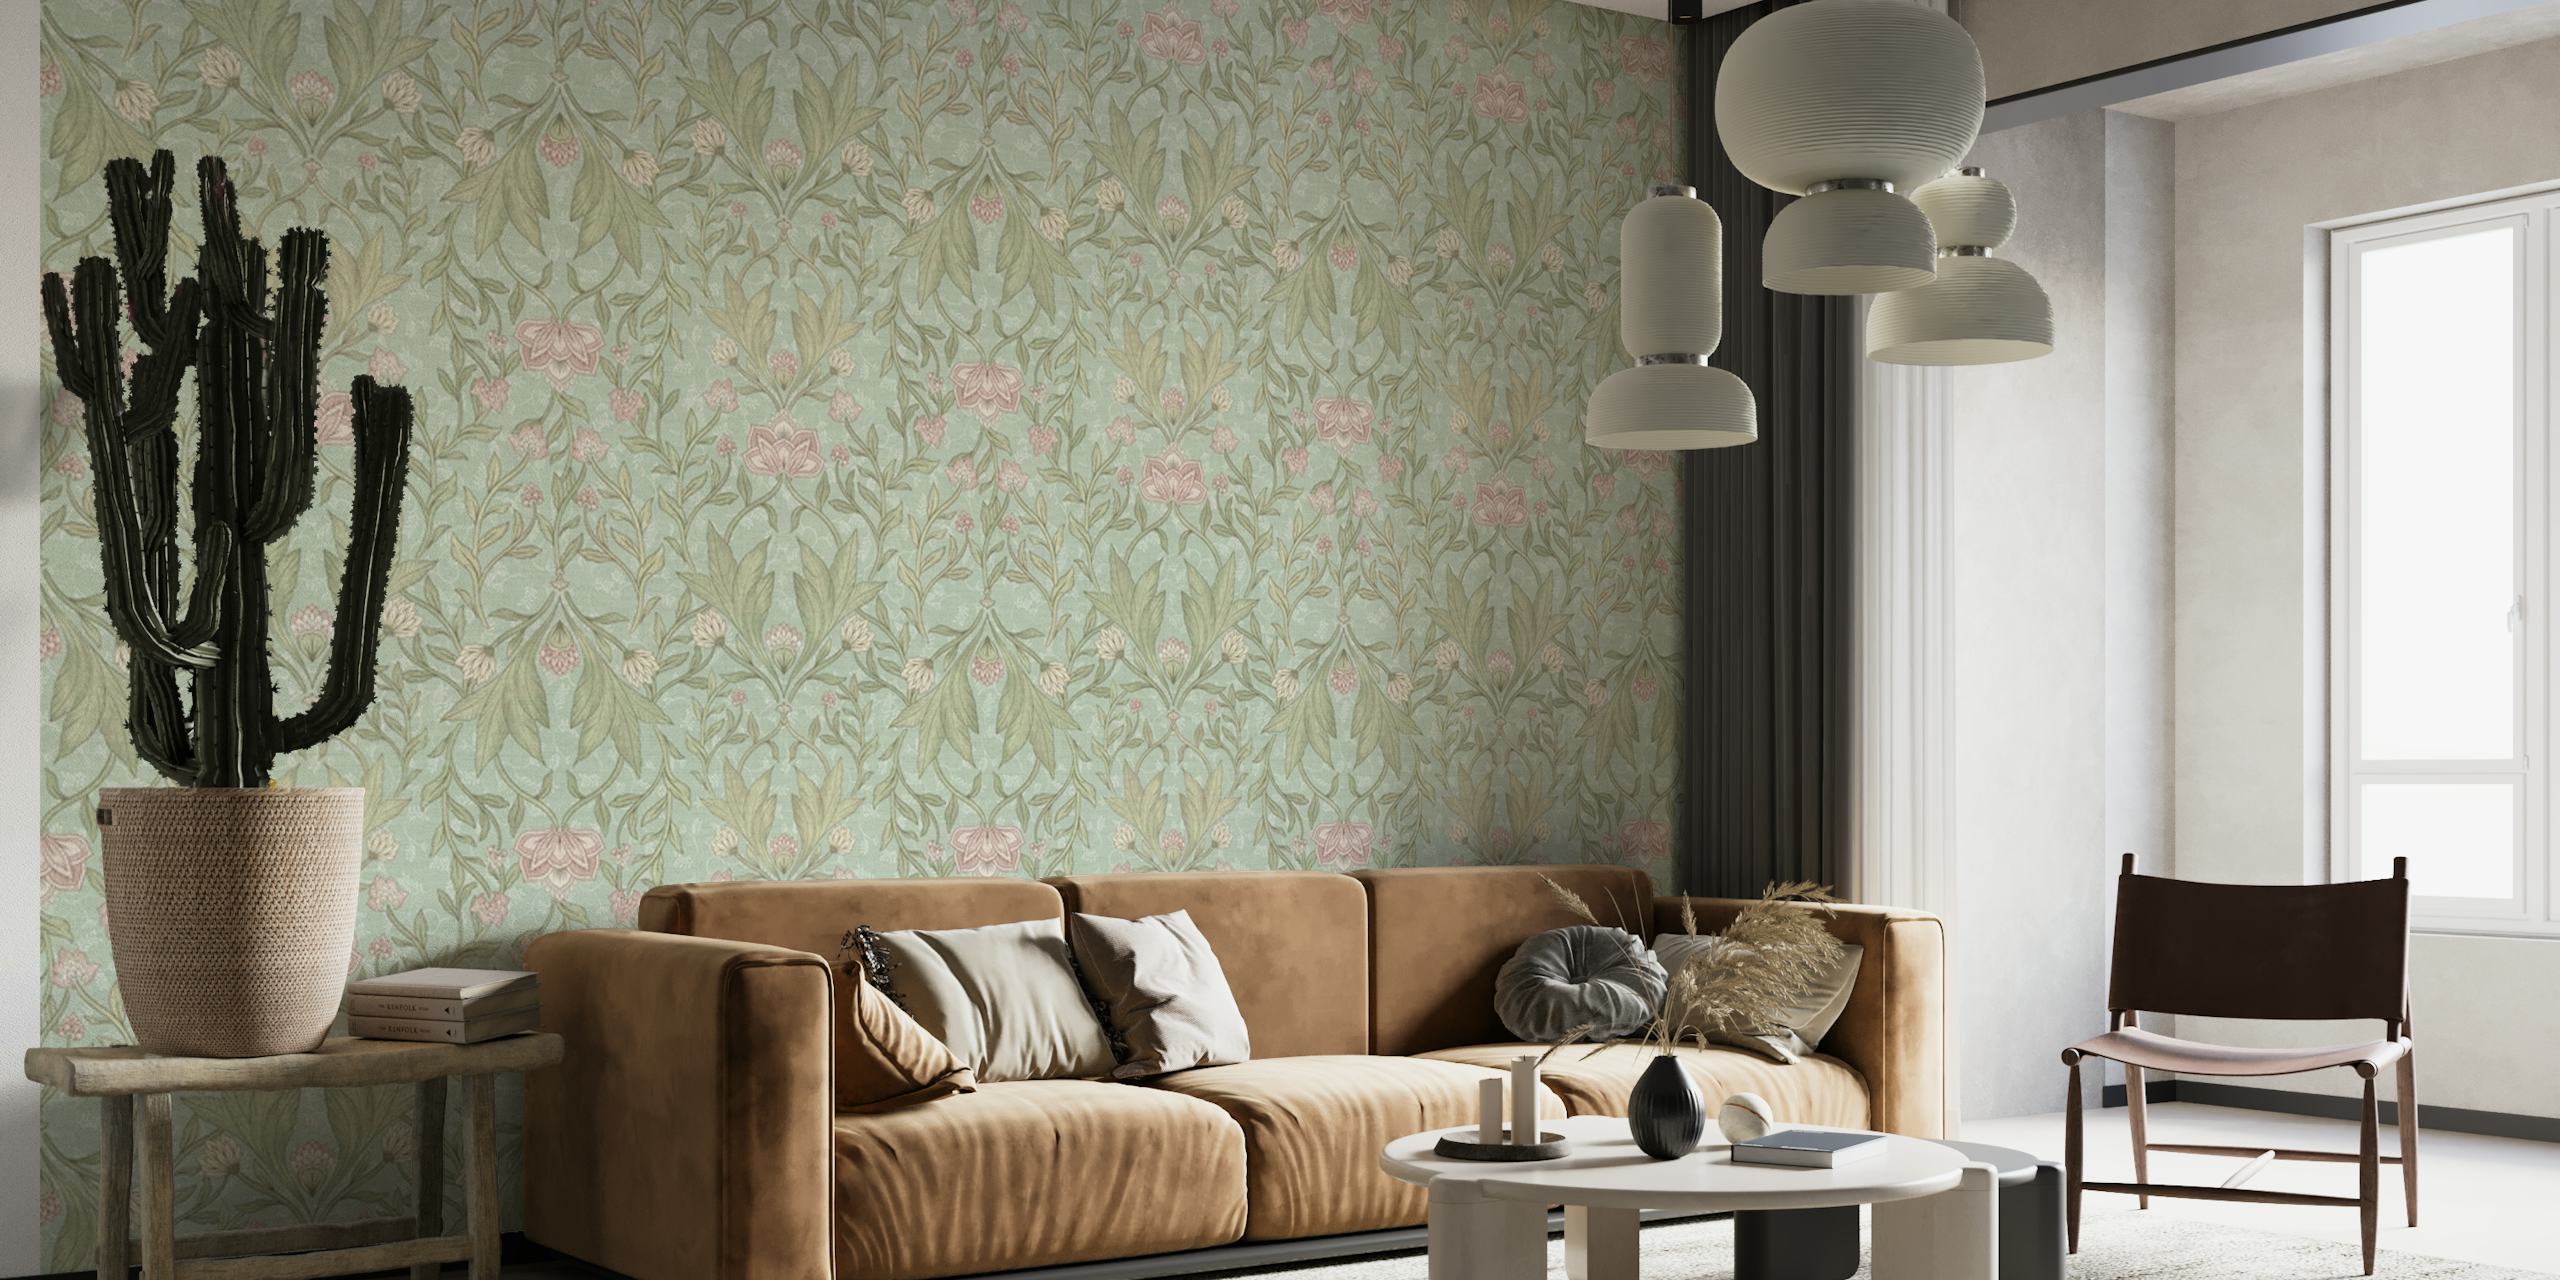 Elegant florals and leaves damask pattern wall mural in subtle hues